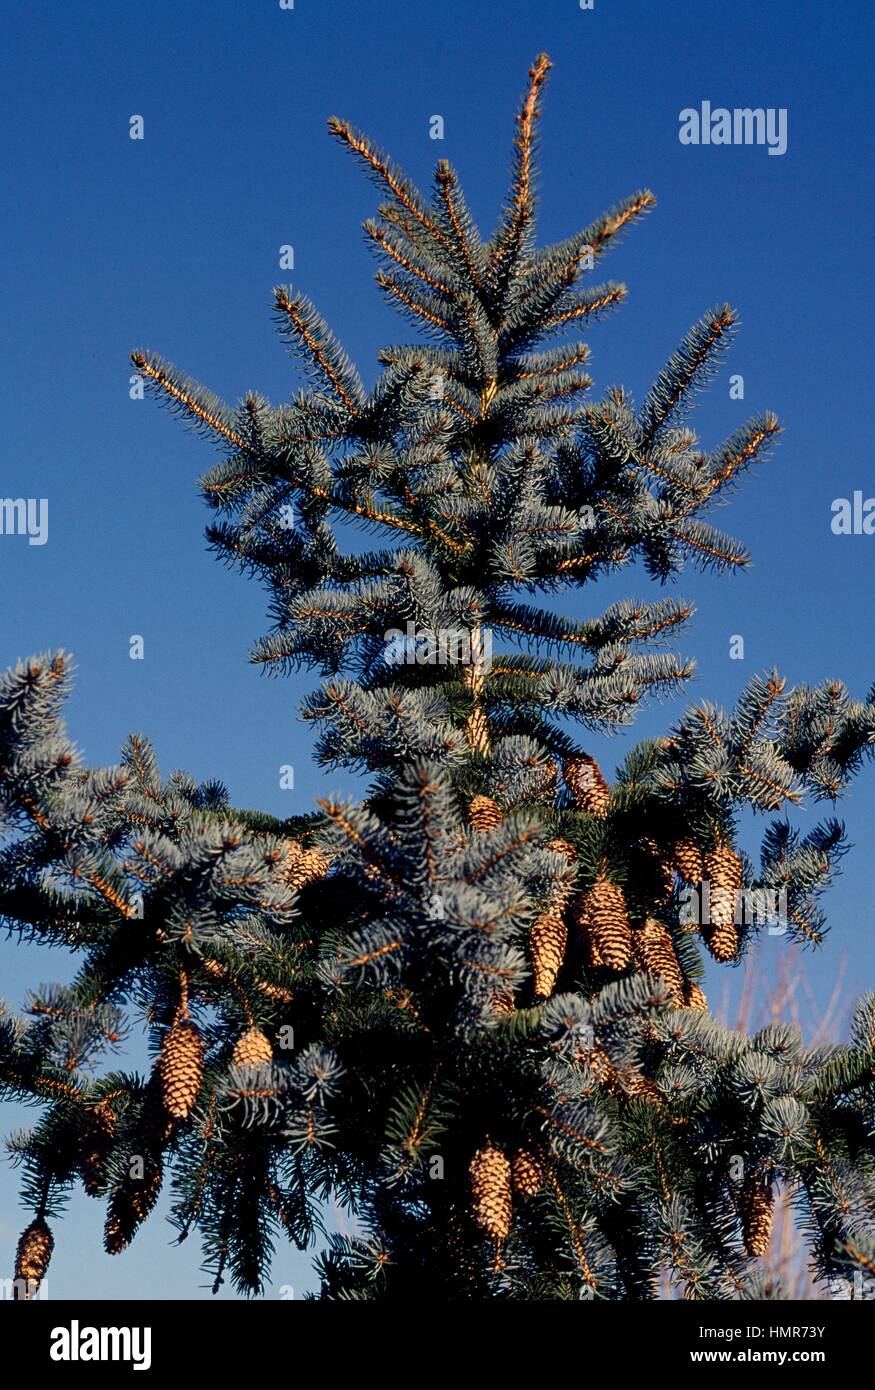 Colorado Blue Spruce (Picea pungens koster), Pinaceae. Detail. Stock Photo